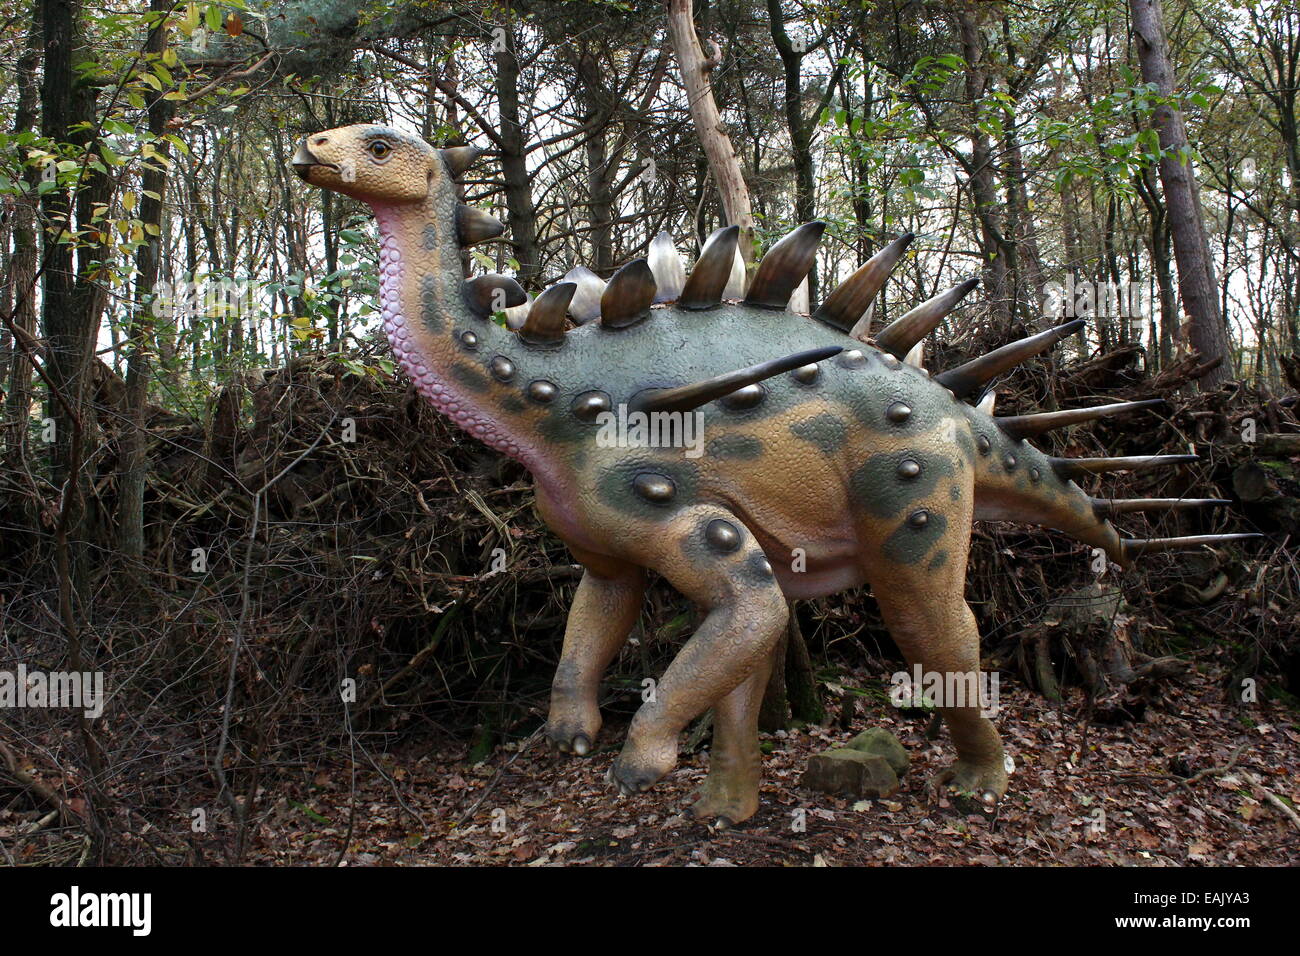 Model of a Kentrosaurus from the Jurassic era. Full-size and lifelike dino statue at  Dinopark Amersfoort Zoo, The Netherlands. Stock Photo